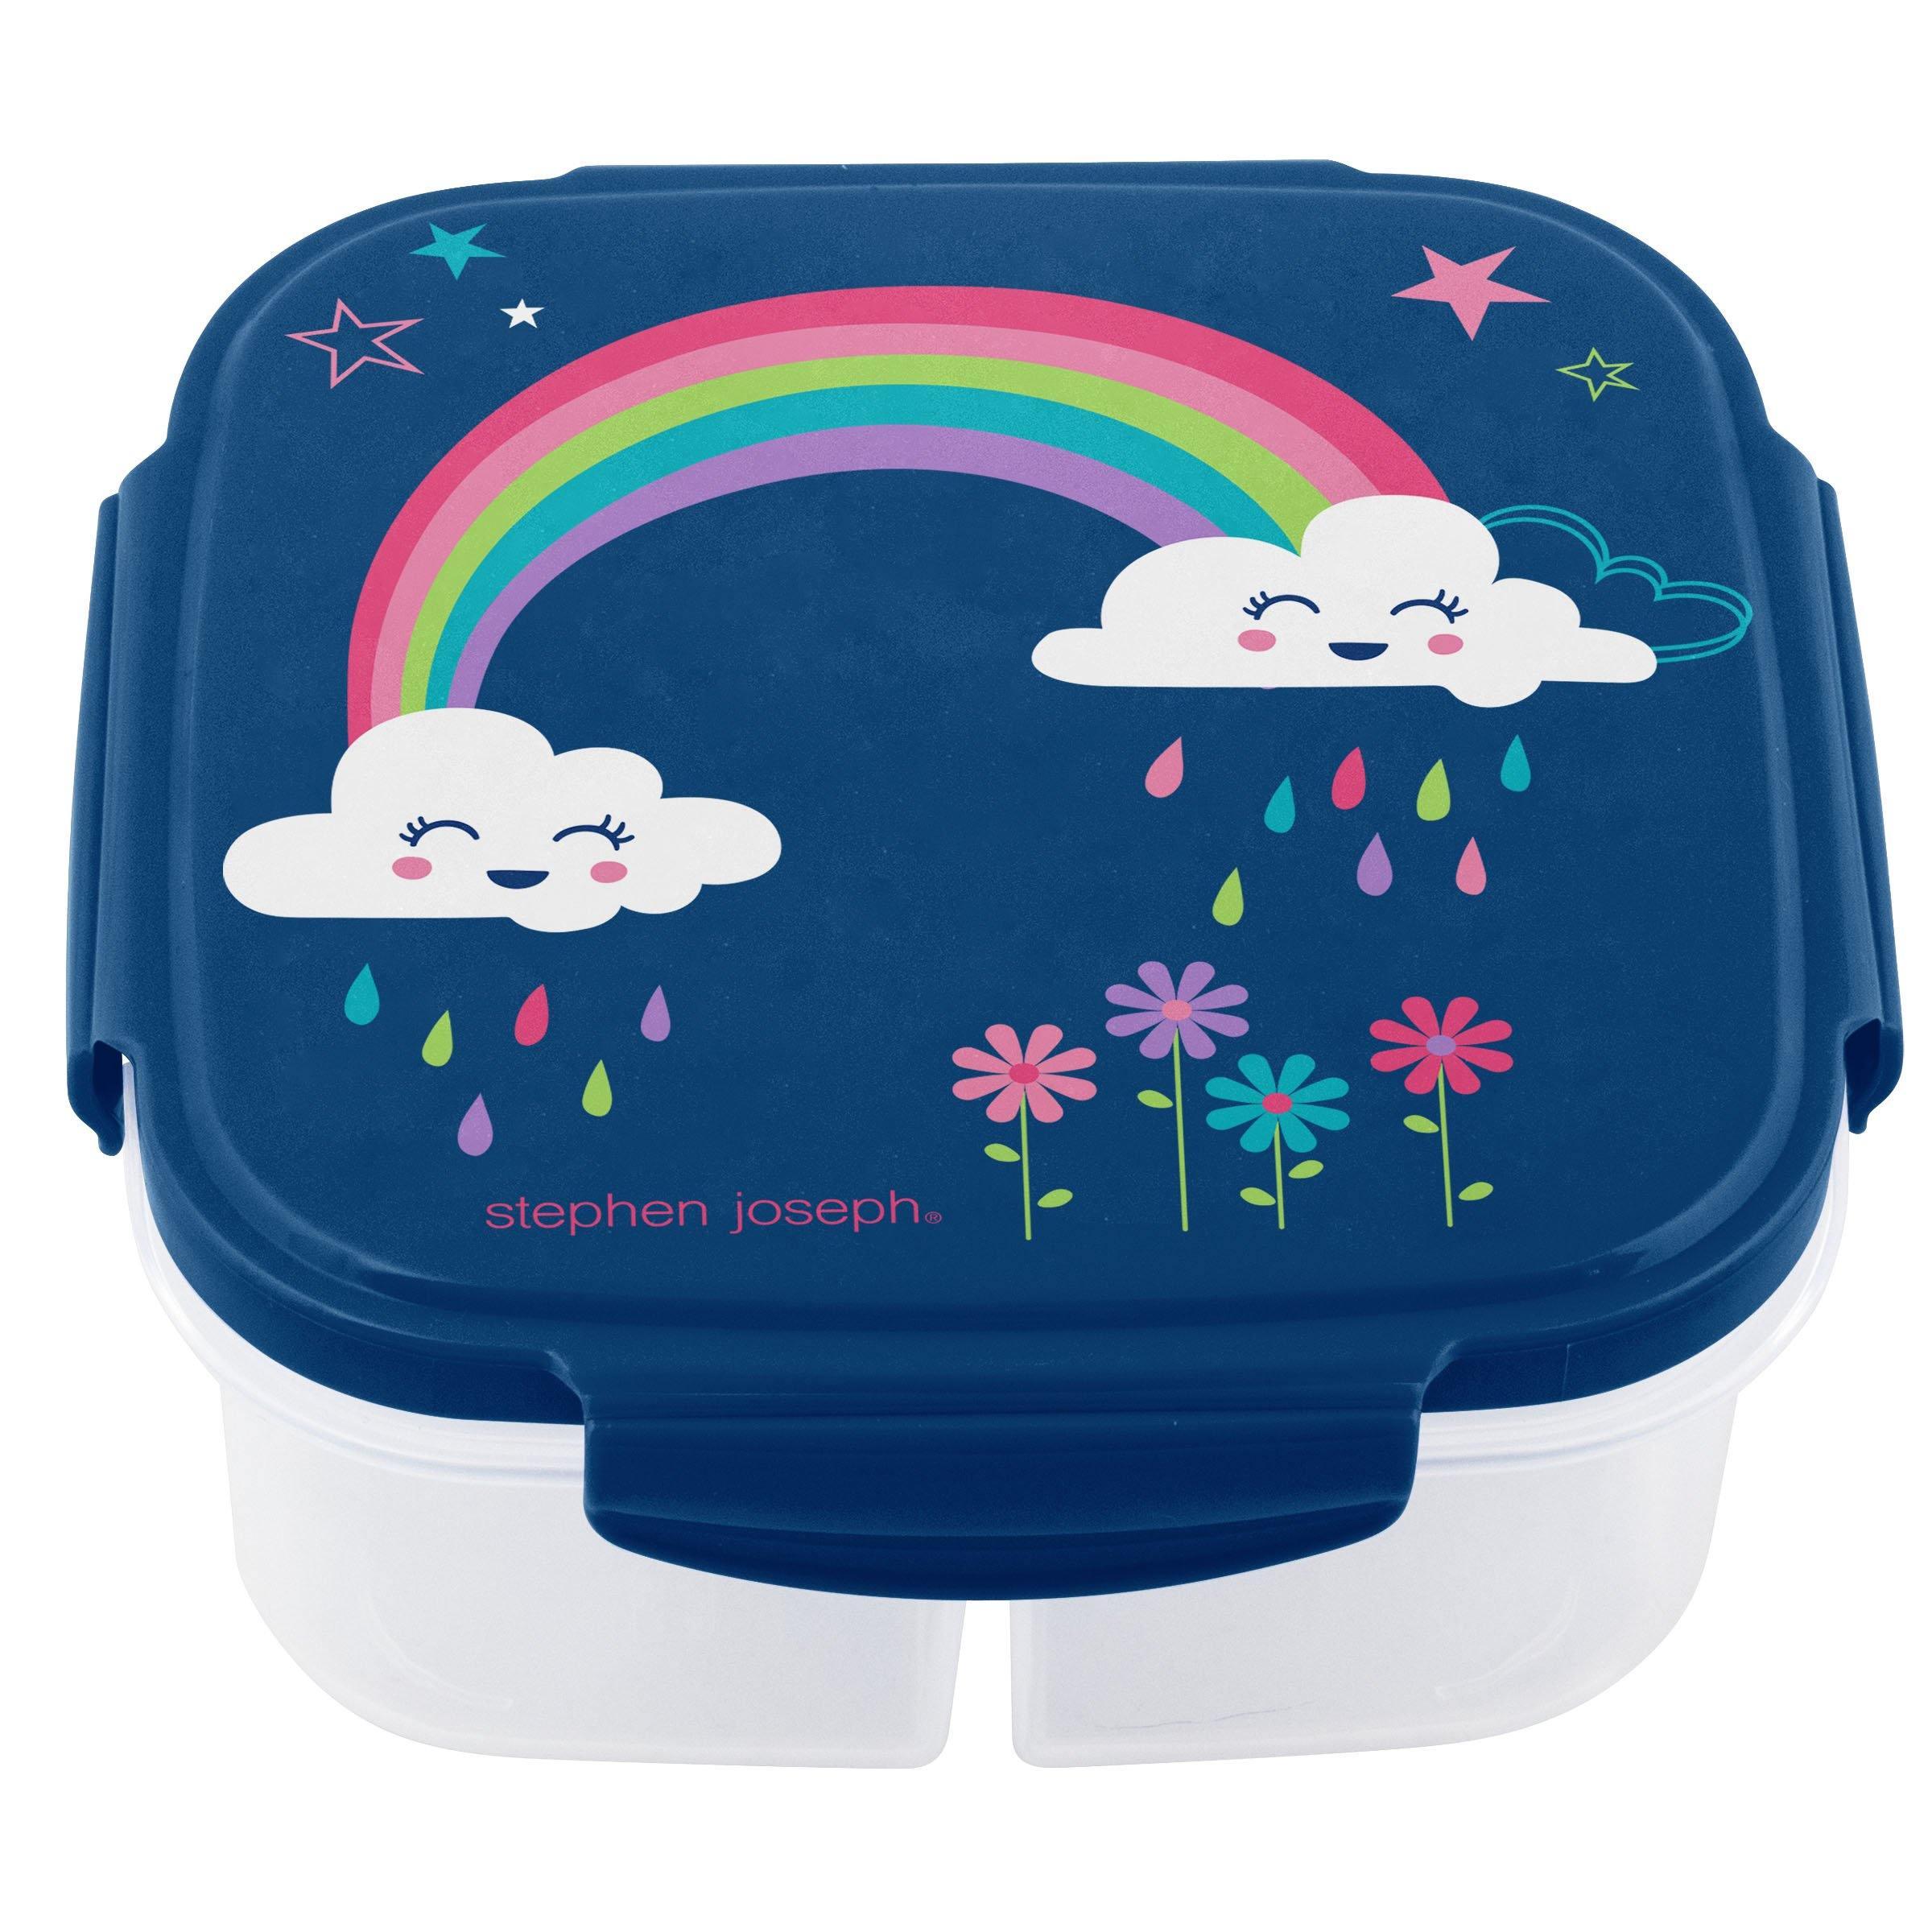 Stephen Joseph Snack Box With Ice Pack Rainbow - BumbleToys - 5-7 Years, Cecil, Girls, Lunch Box, School Supplies